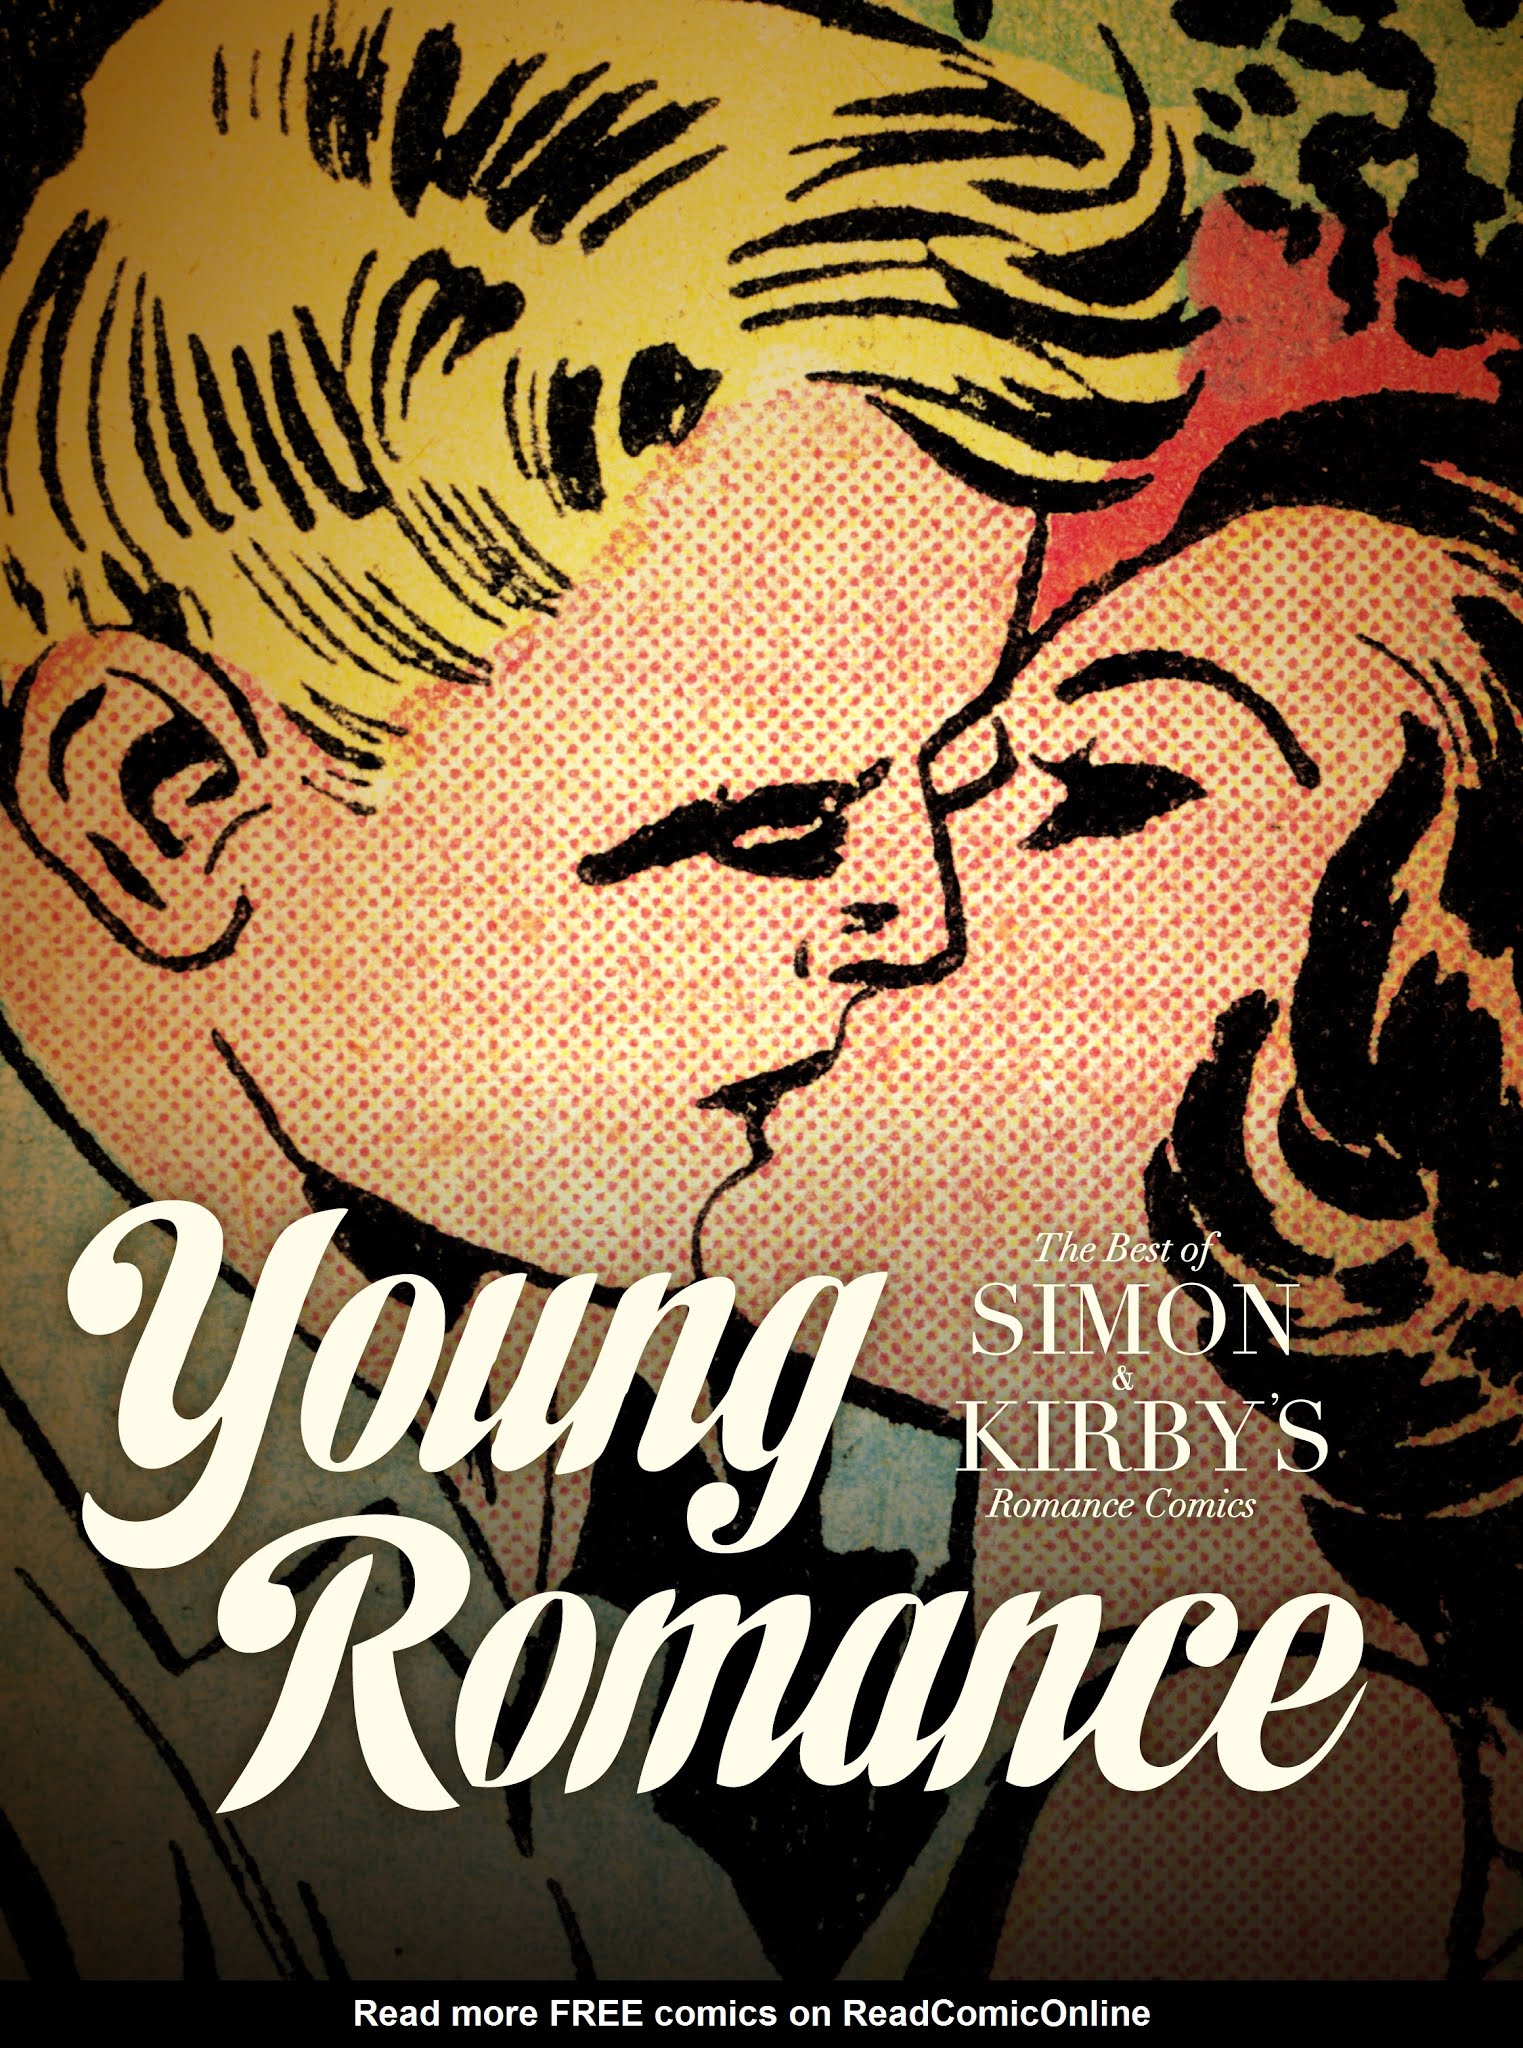 Read online Young Romance: The Best of Simon & Kirby’s Romance Comics comic -  Issue # TPB 3 - 1